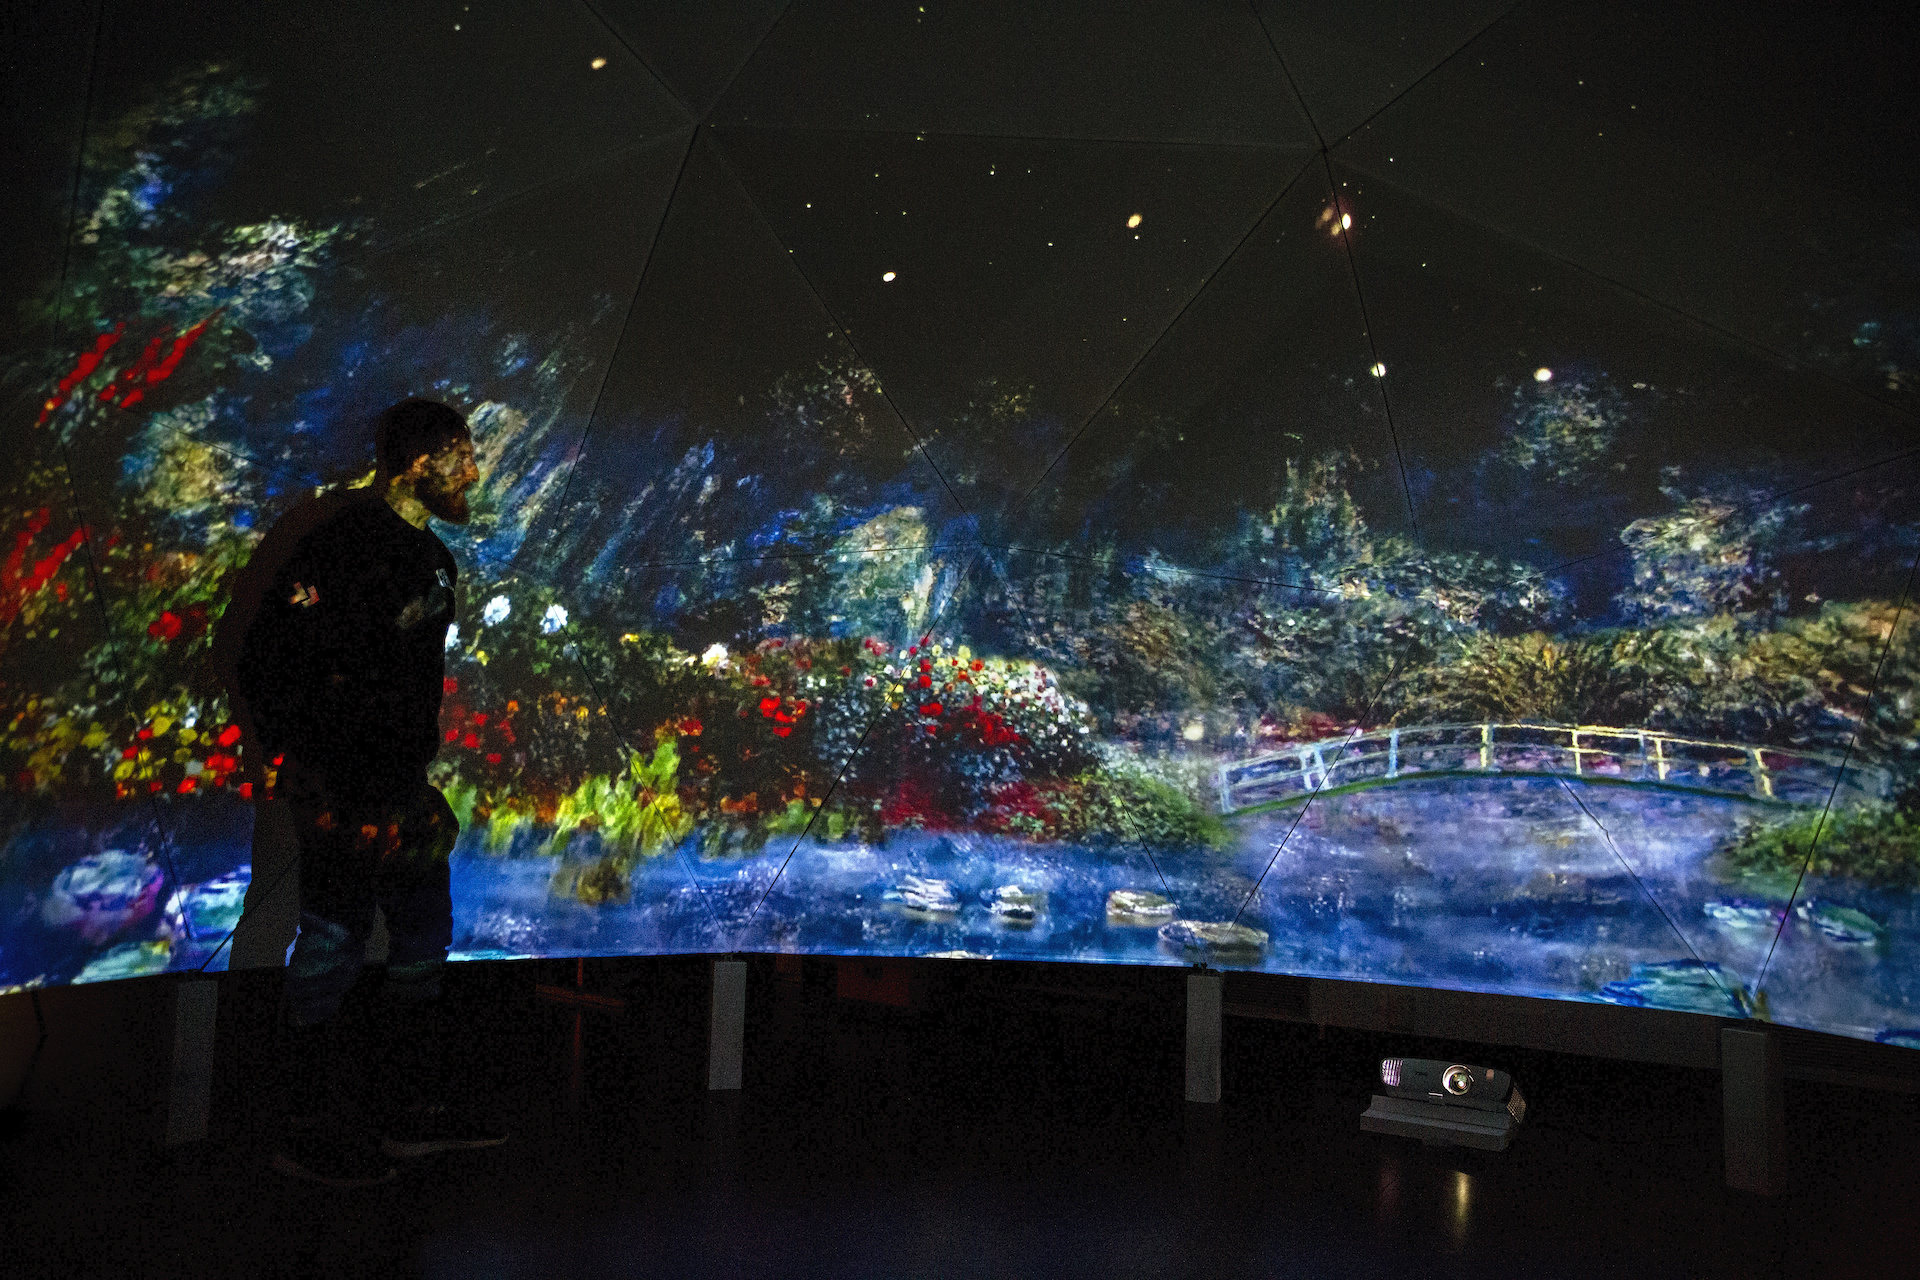 A nighttime scene of a garden with a pond and footbridge, painted in the style of Monet, projected on a large wall. A figure stands on the left, with light projected on them and their shadow cast on the screen, while a projector sits on the floor opposite.